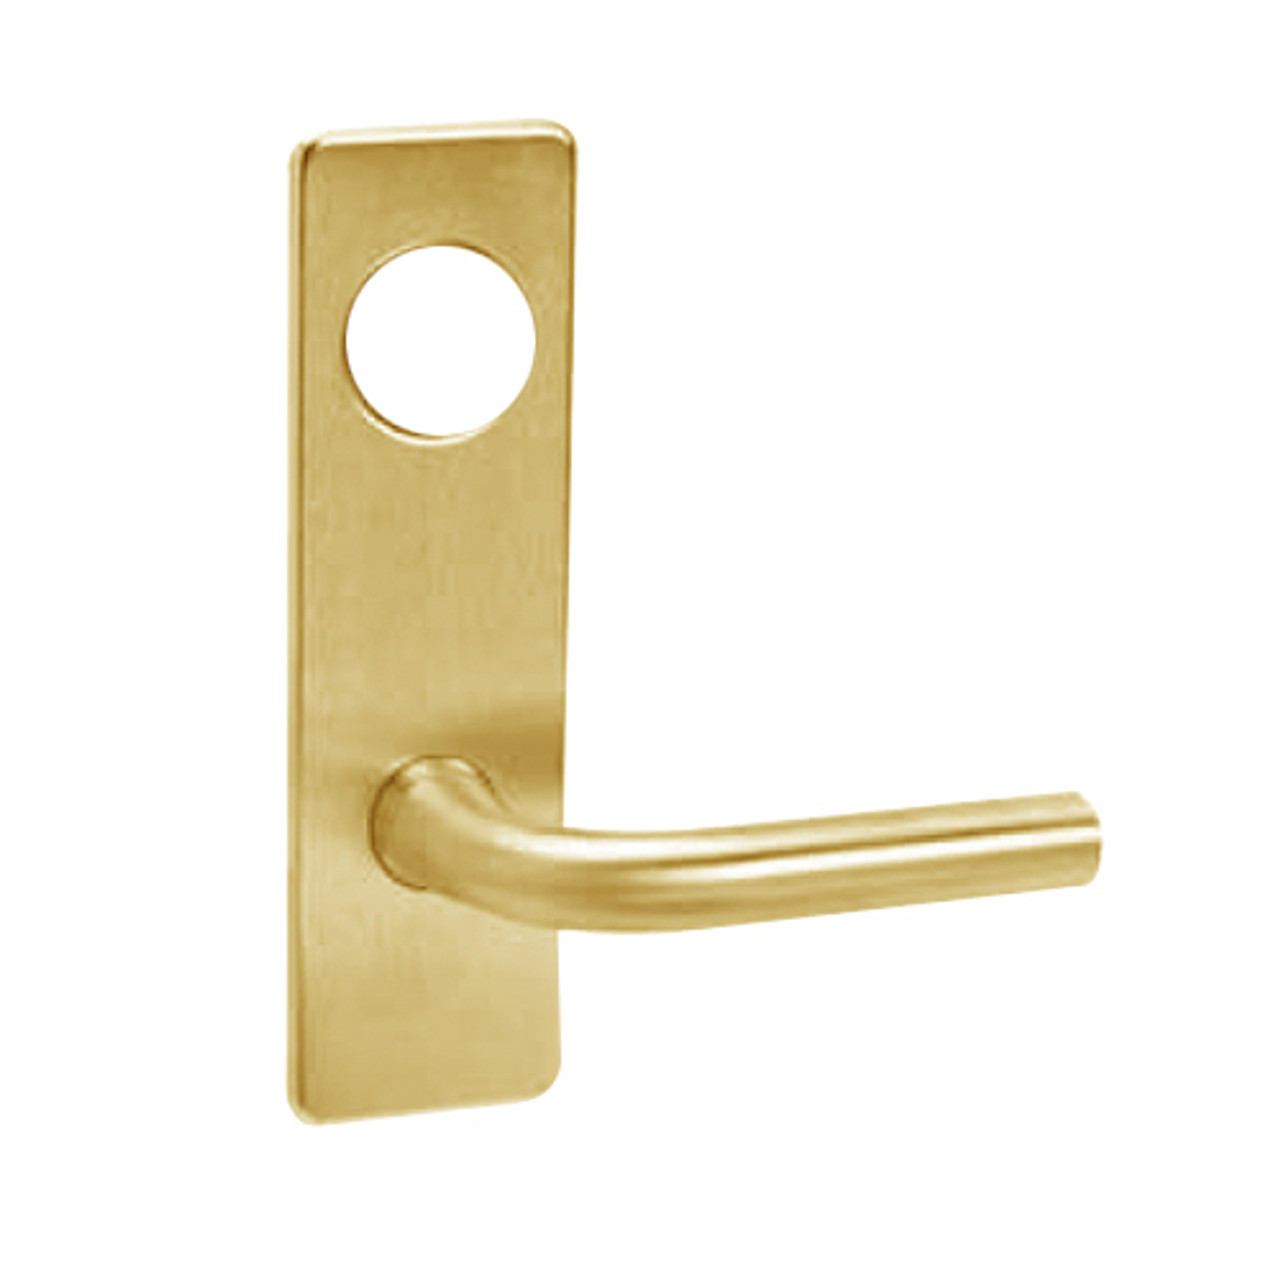 ML2067-RSP-606-CL7 Corbin Russwin ML2000 Series IC 7-Pin Less Core Mortise Apartment Locksets with Regis Lever in Satin Brass